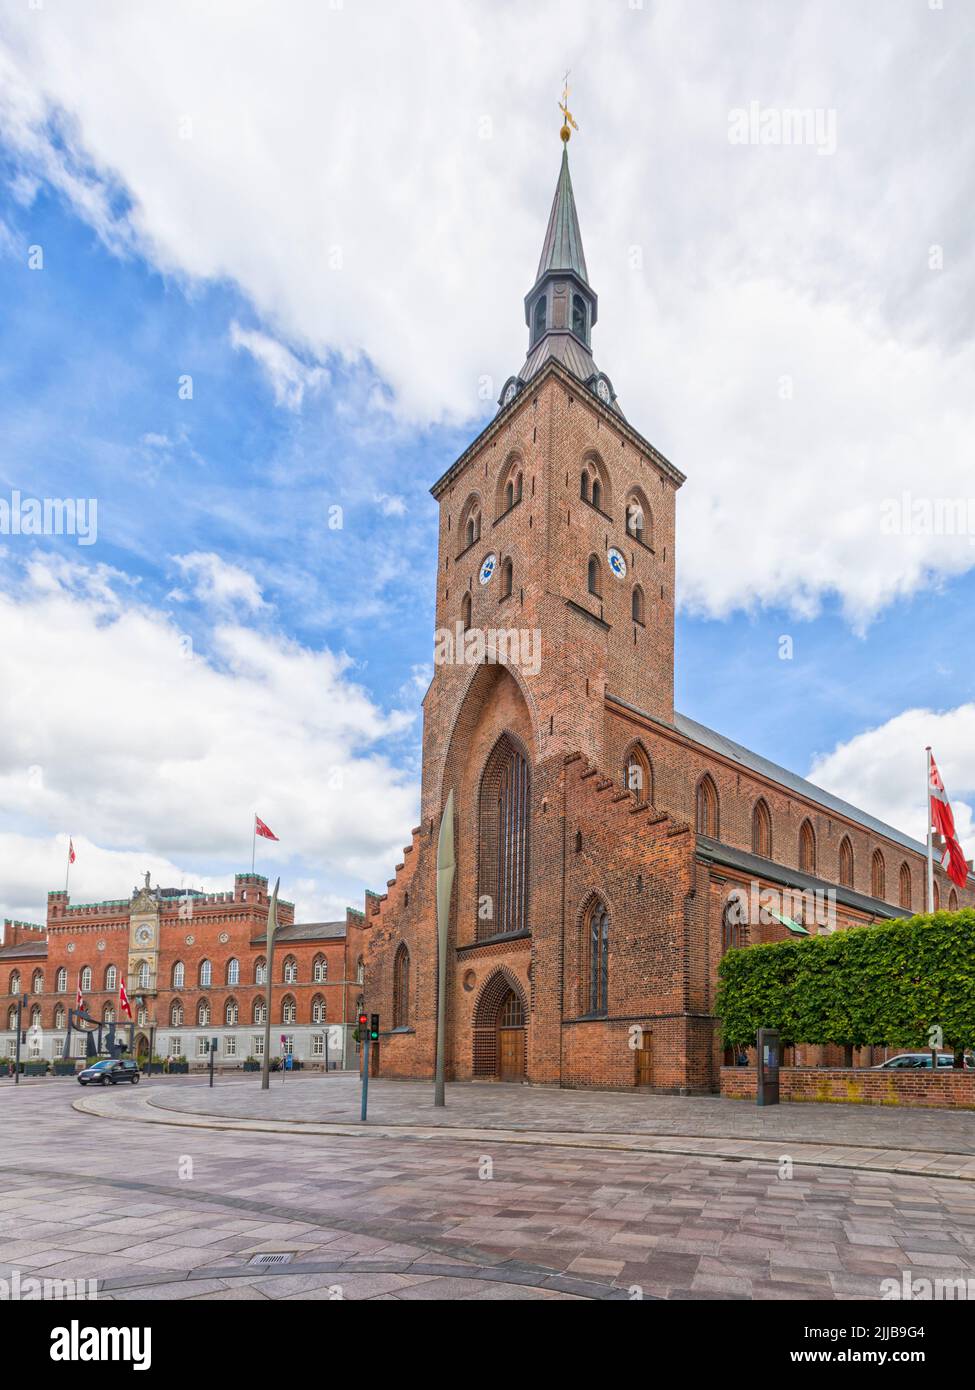 Odense Domkirke, St. Canute's Cathedral or Odense Cathedral with town hall in background Stock Photo